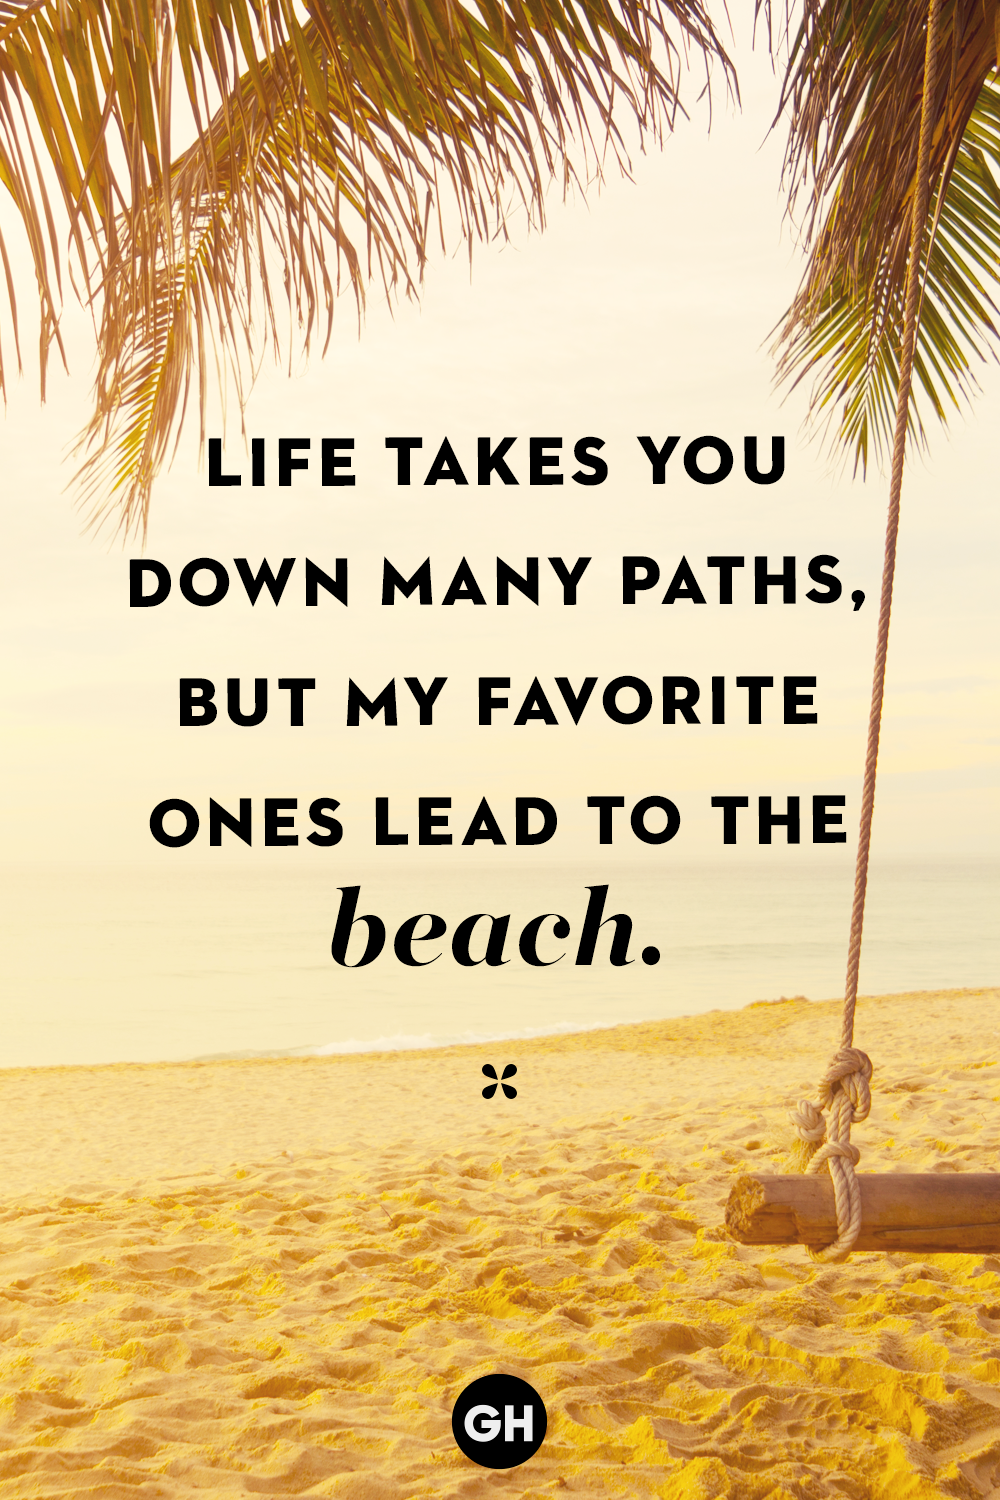 12 Best Beach Quotes   Sayings and Quotes About the Beach